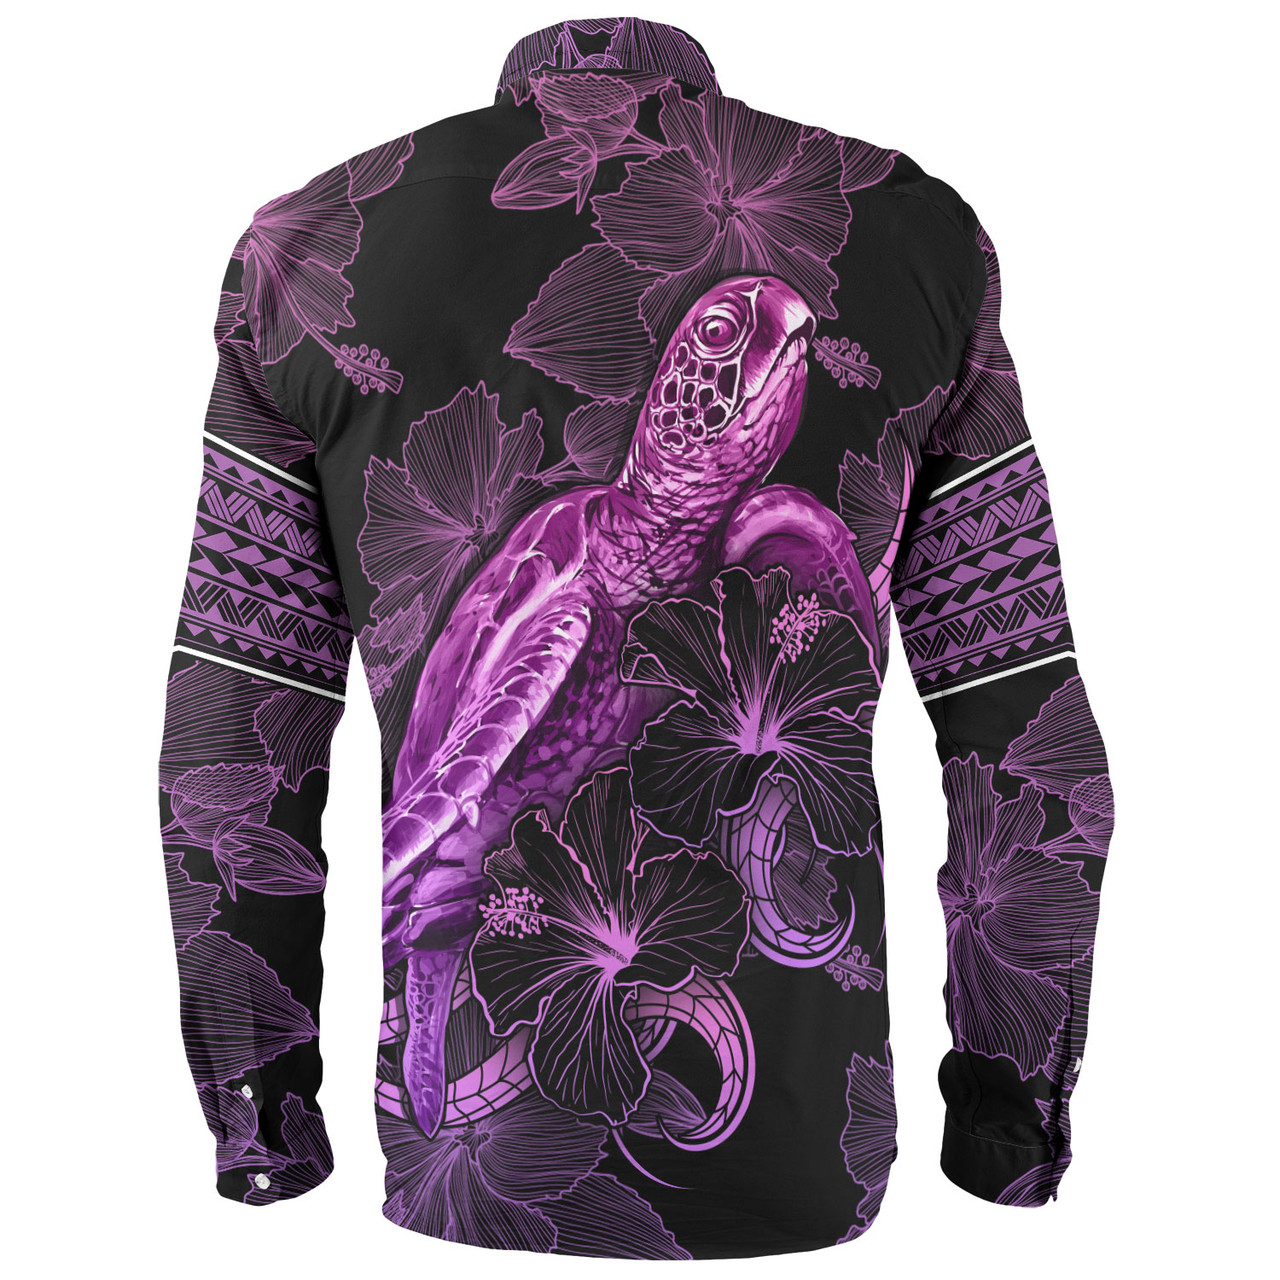 Pohnpei State Long Sleeve Shirt Sea Turtle With Blooming Hibiscus Flowers Tribal Purple